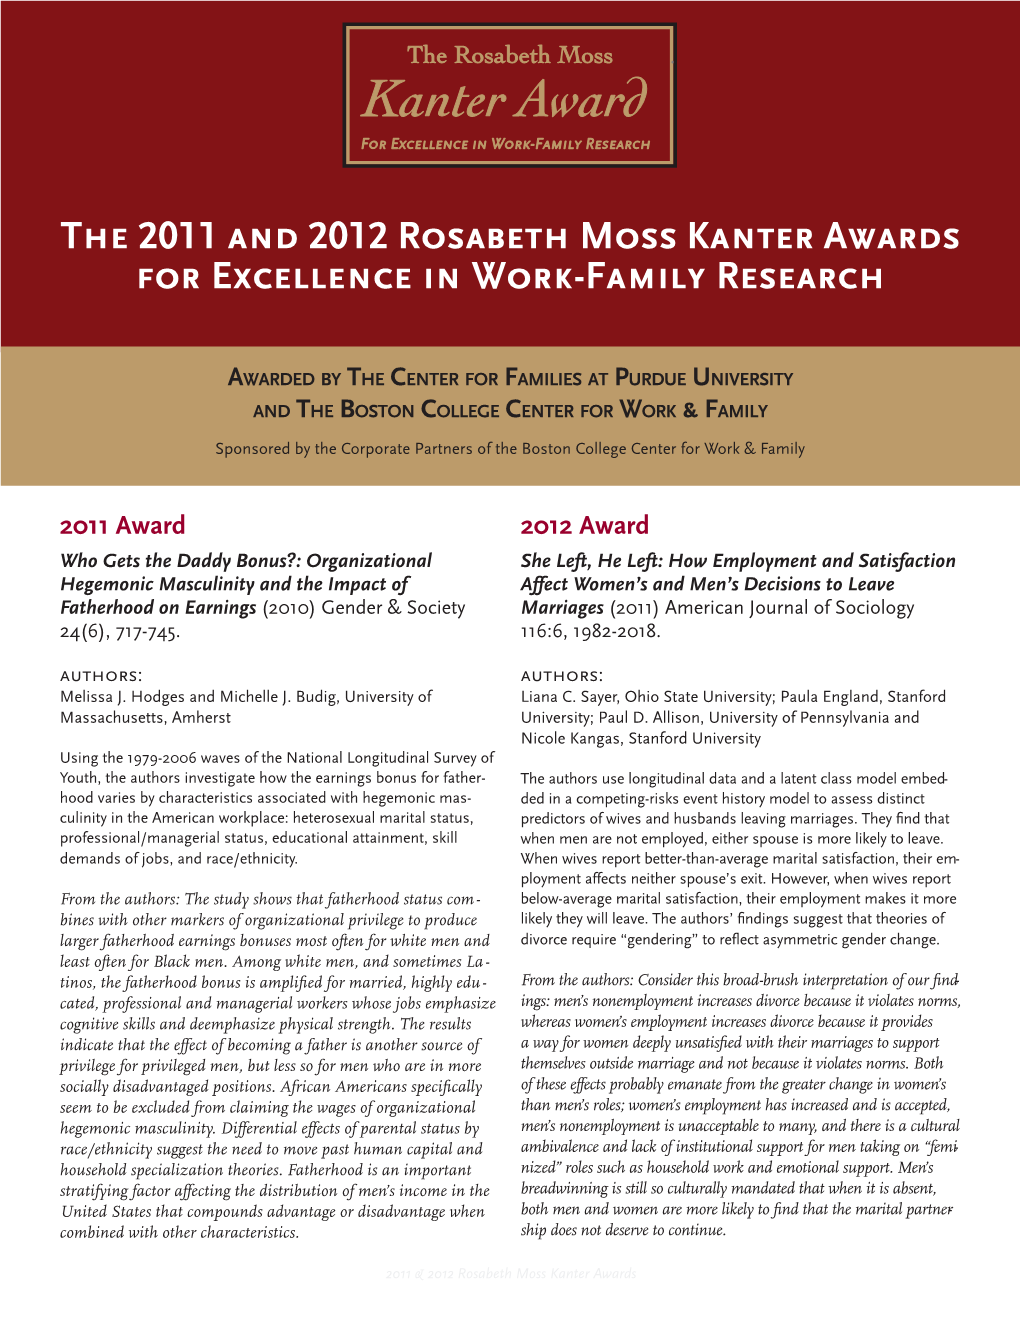 The 2011 and 2012 Rosabeth Moss Kanter Awards for Excellence in Work-Family Research